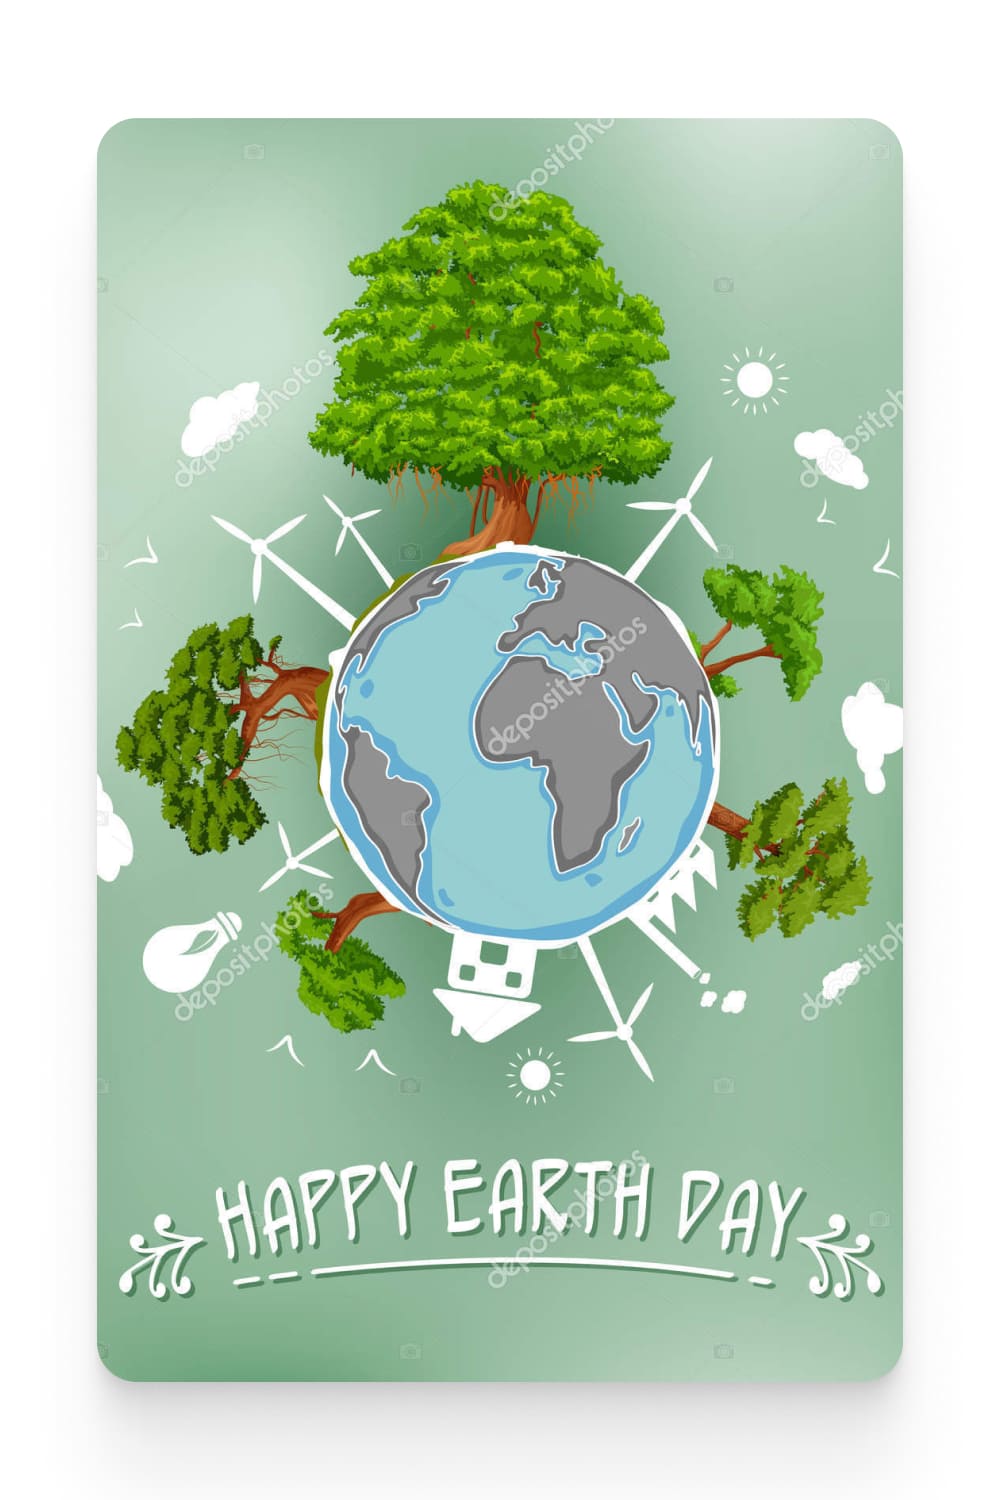 Earth Day concept for safe and Green Globe.